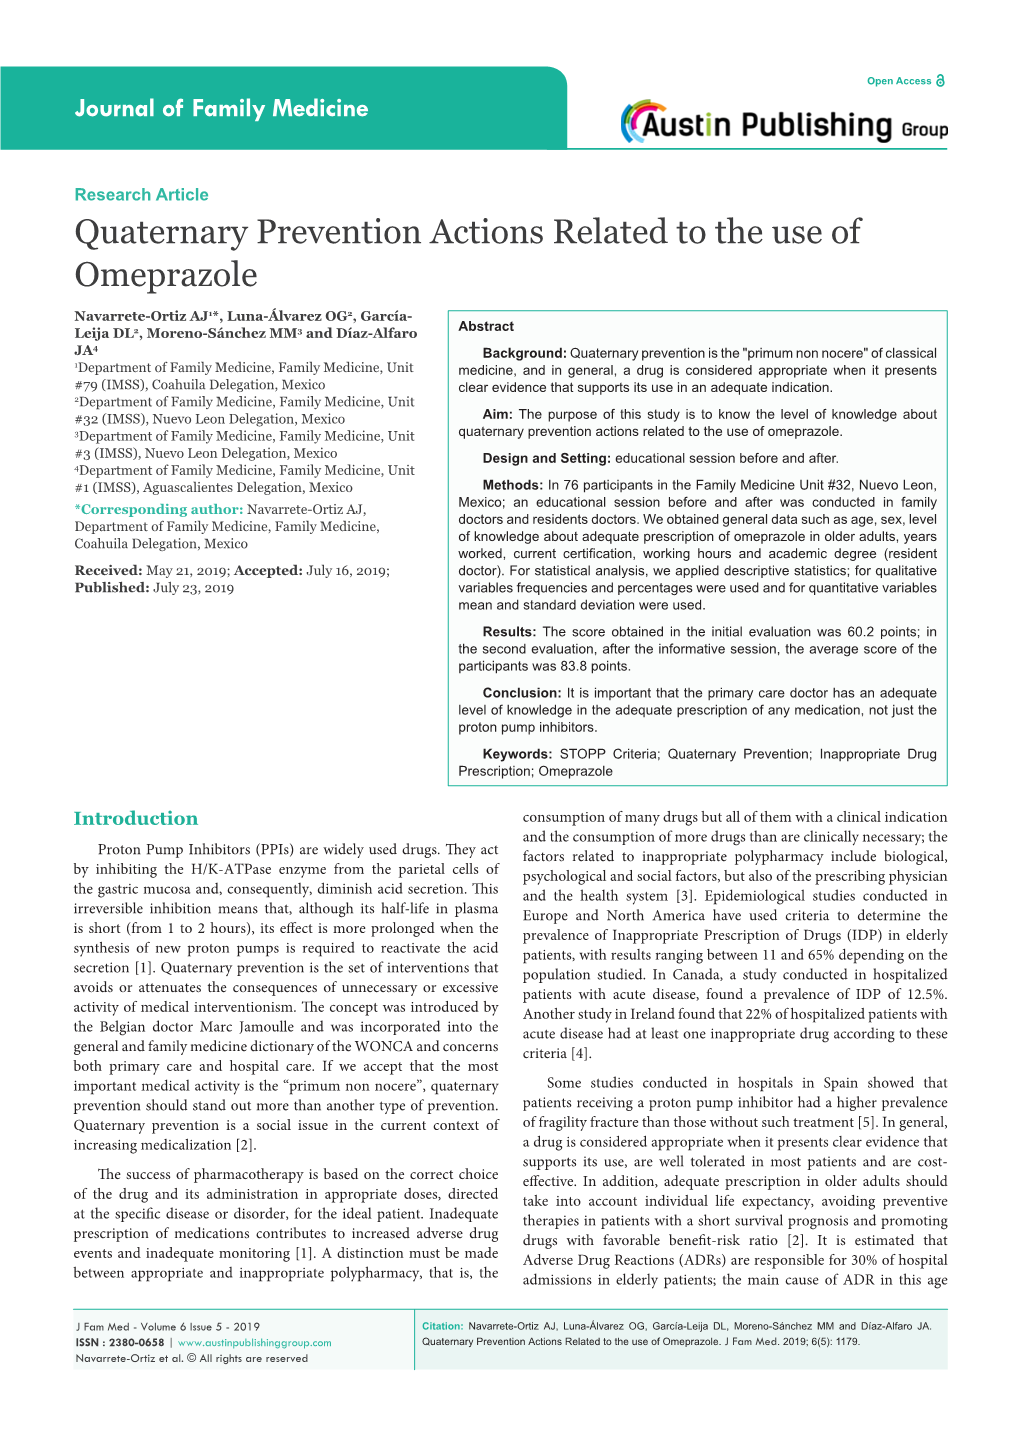 Quaternary Prevention Actions Related to the Use of Omeprazole